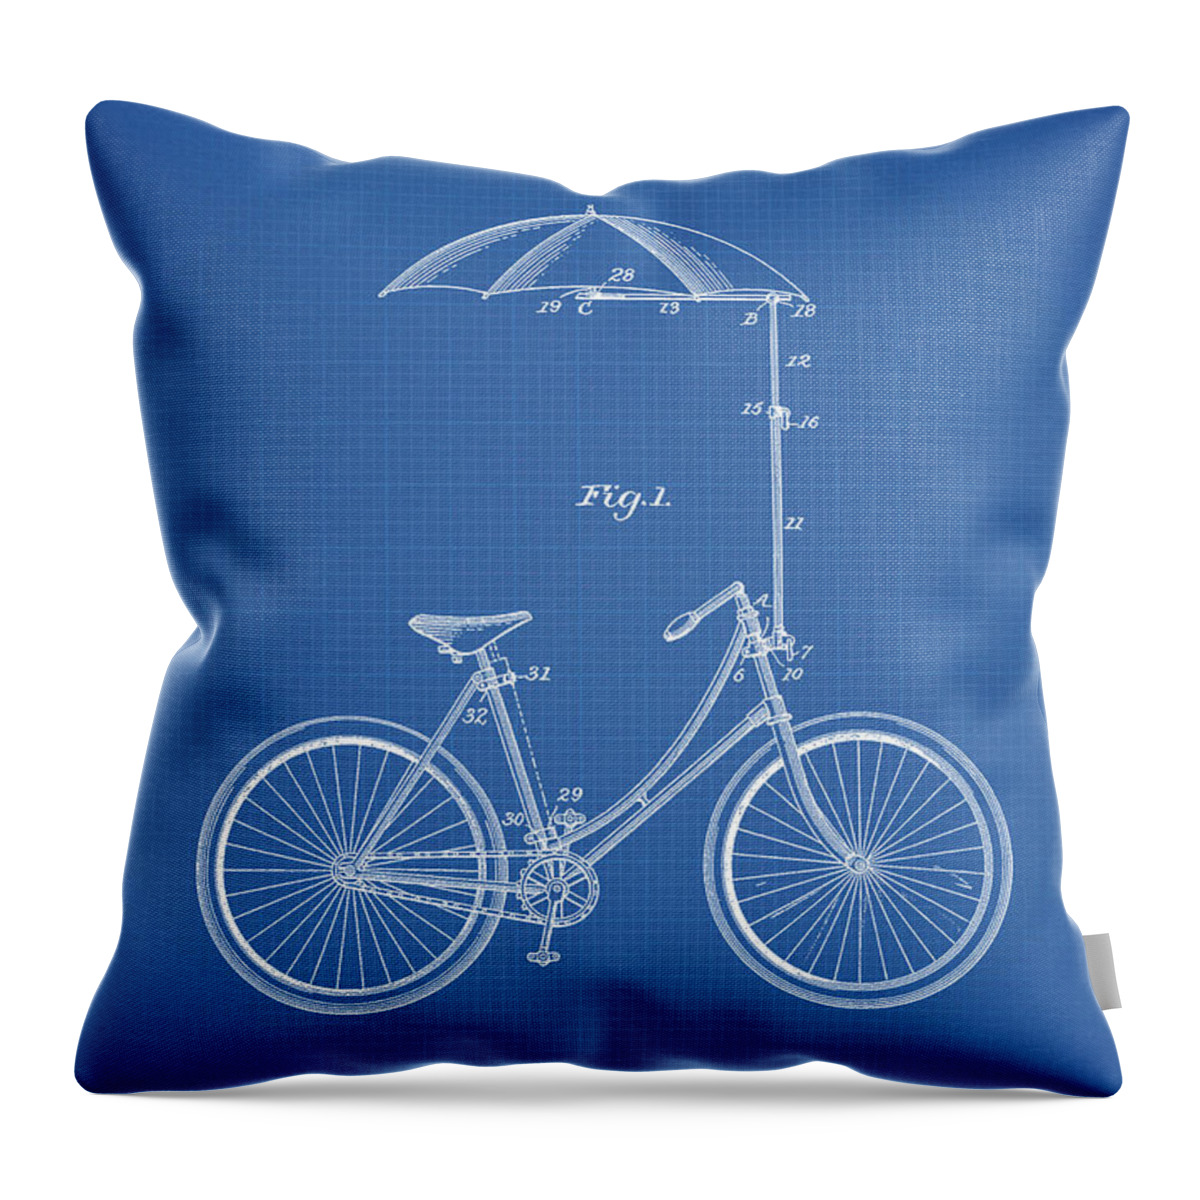 Bicycle Throw Pillow featuring the digital art Bicycle parasol blue patent by Dennson Creative